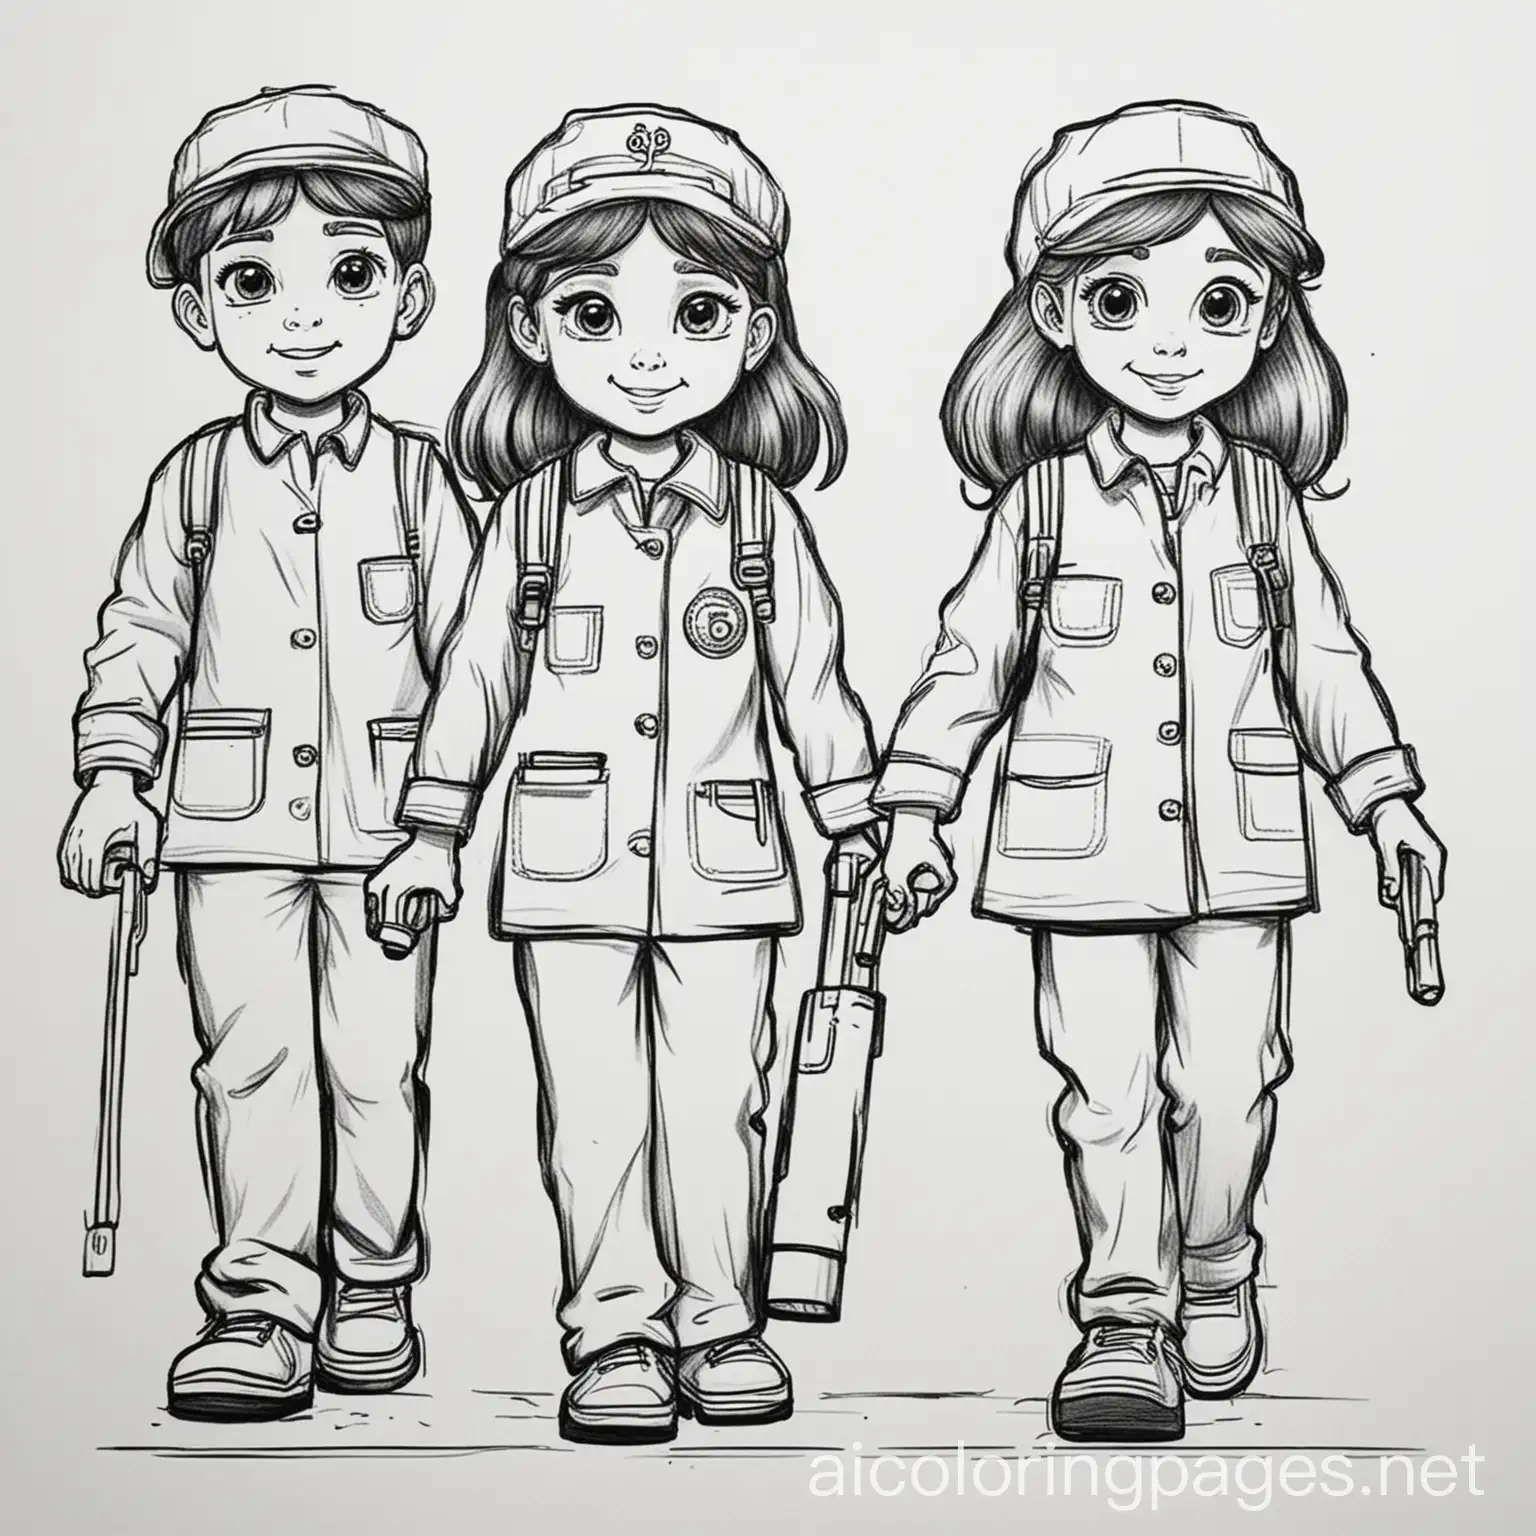 Children-Walking-in-Professions-Coloring-Page-Black-and-White-Line-Art